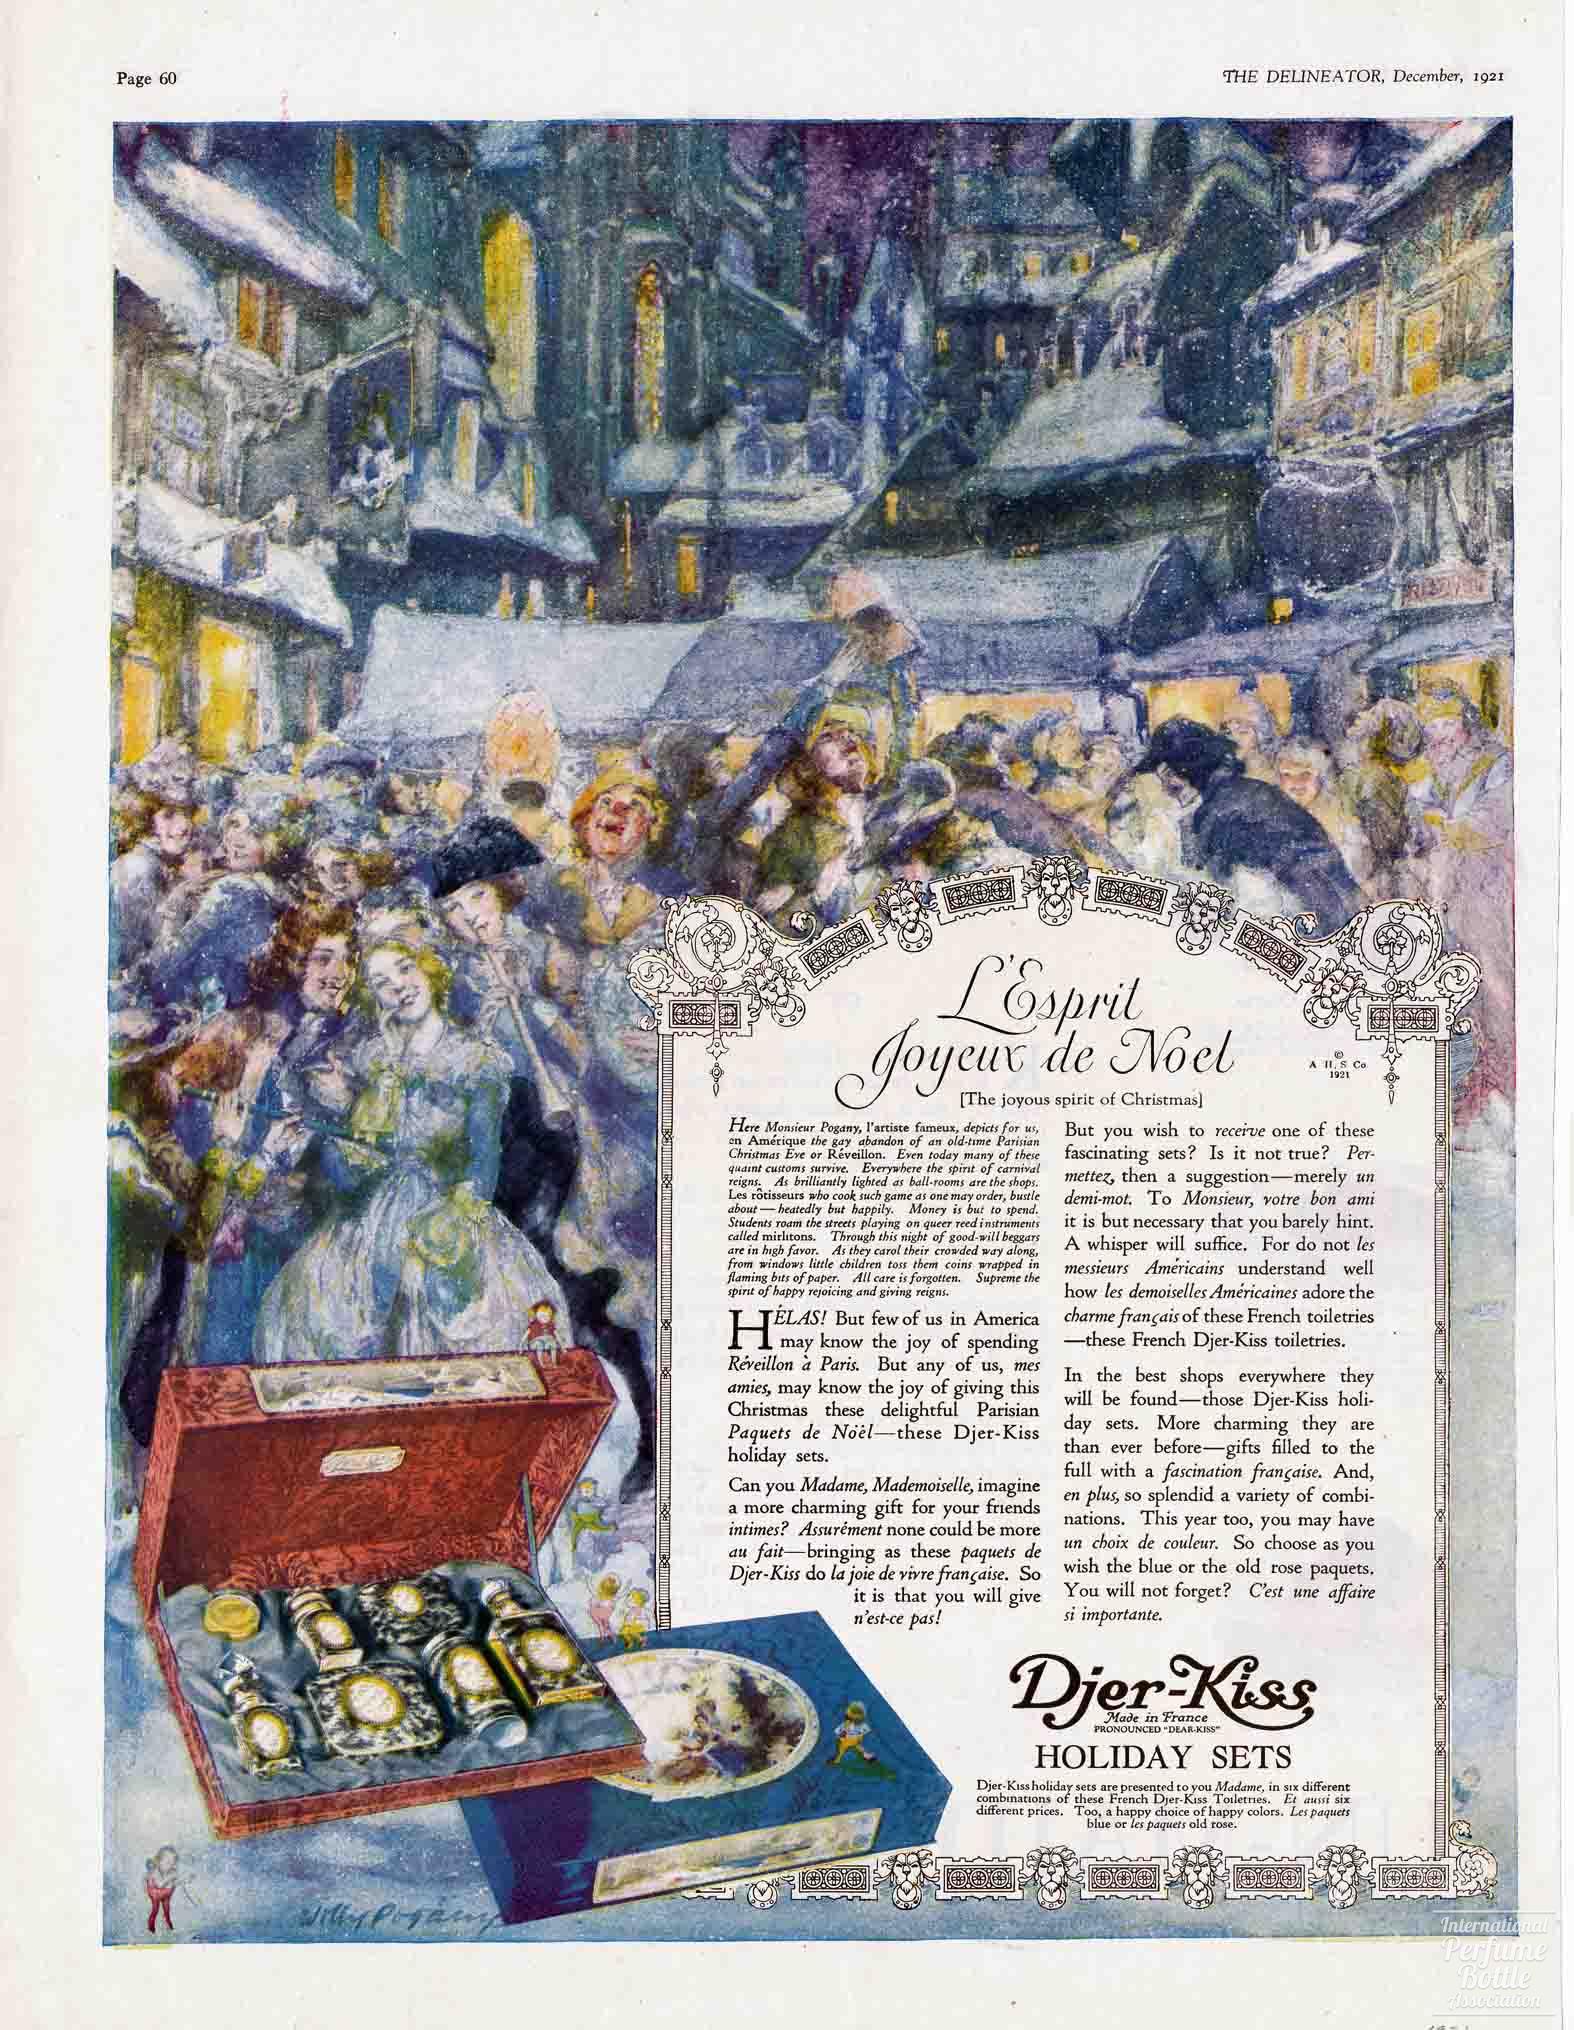 "Djer-Kiss" by Kerkoff Advertisement - 1921